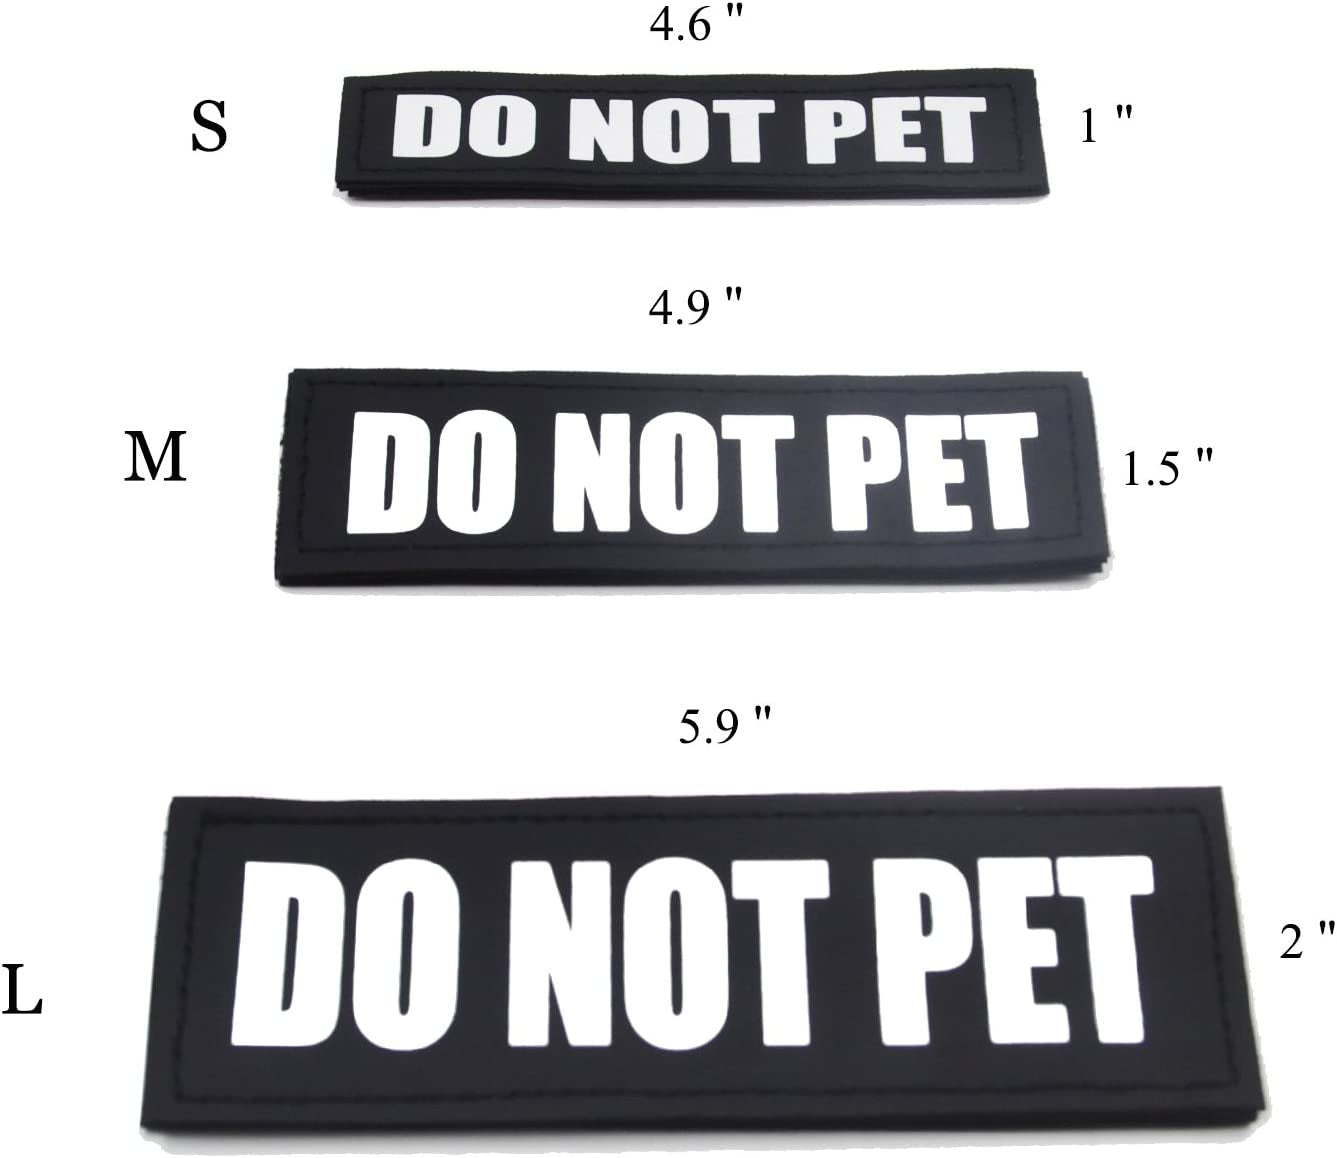 JUJUPUPS 2 Pack Reflective Tactical Dog Patches Service Dog ，in Training,DO  NOT PET, Tags with Hook and Loop Patches for Vests and Harnesses (Coyote